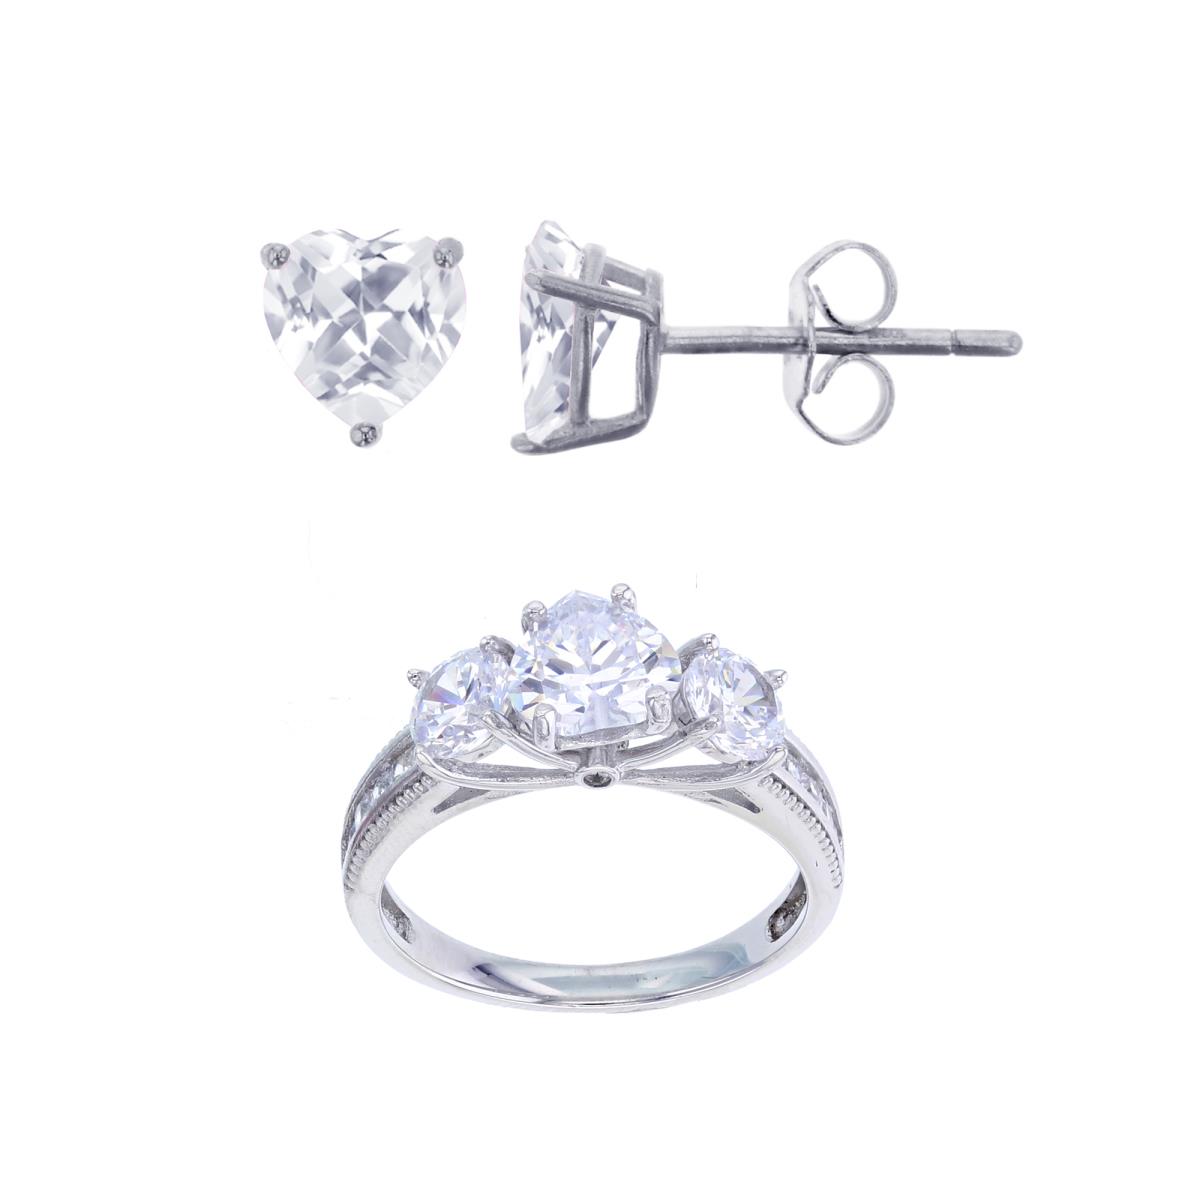 Sterling Silver Rhodium 3-Stone 7mm Hrt & 5mm Rd CZ Ring & 6mm Hrt Solitaire Stud Earring Set